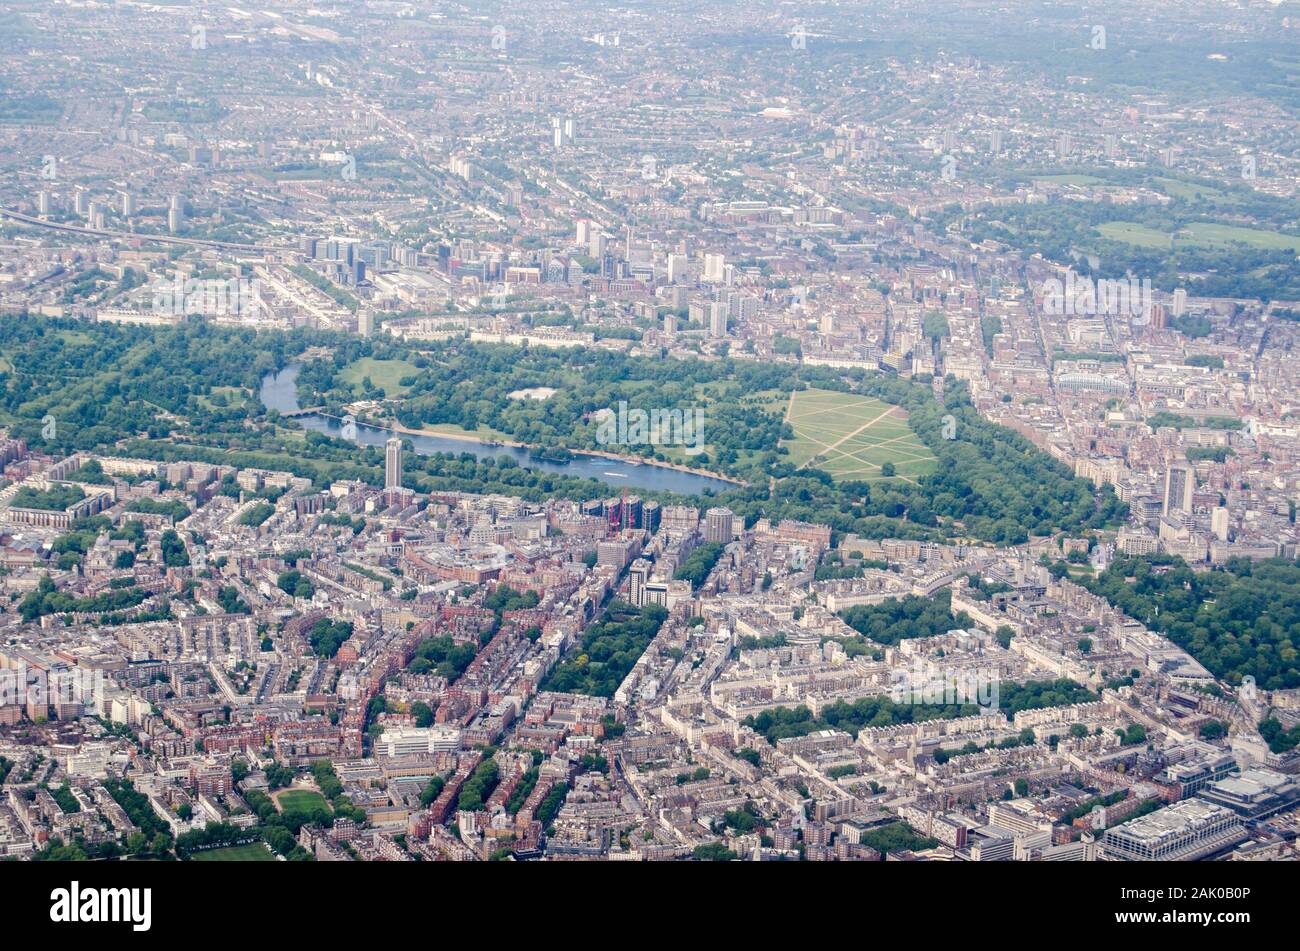 Aerial view looking north across the wealthy areas of Belgravia and Knightsbridge towards Hyde Park and Bayswater in London. Stock Photo